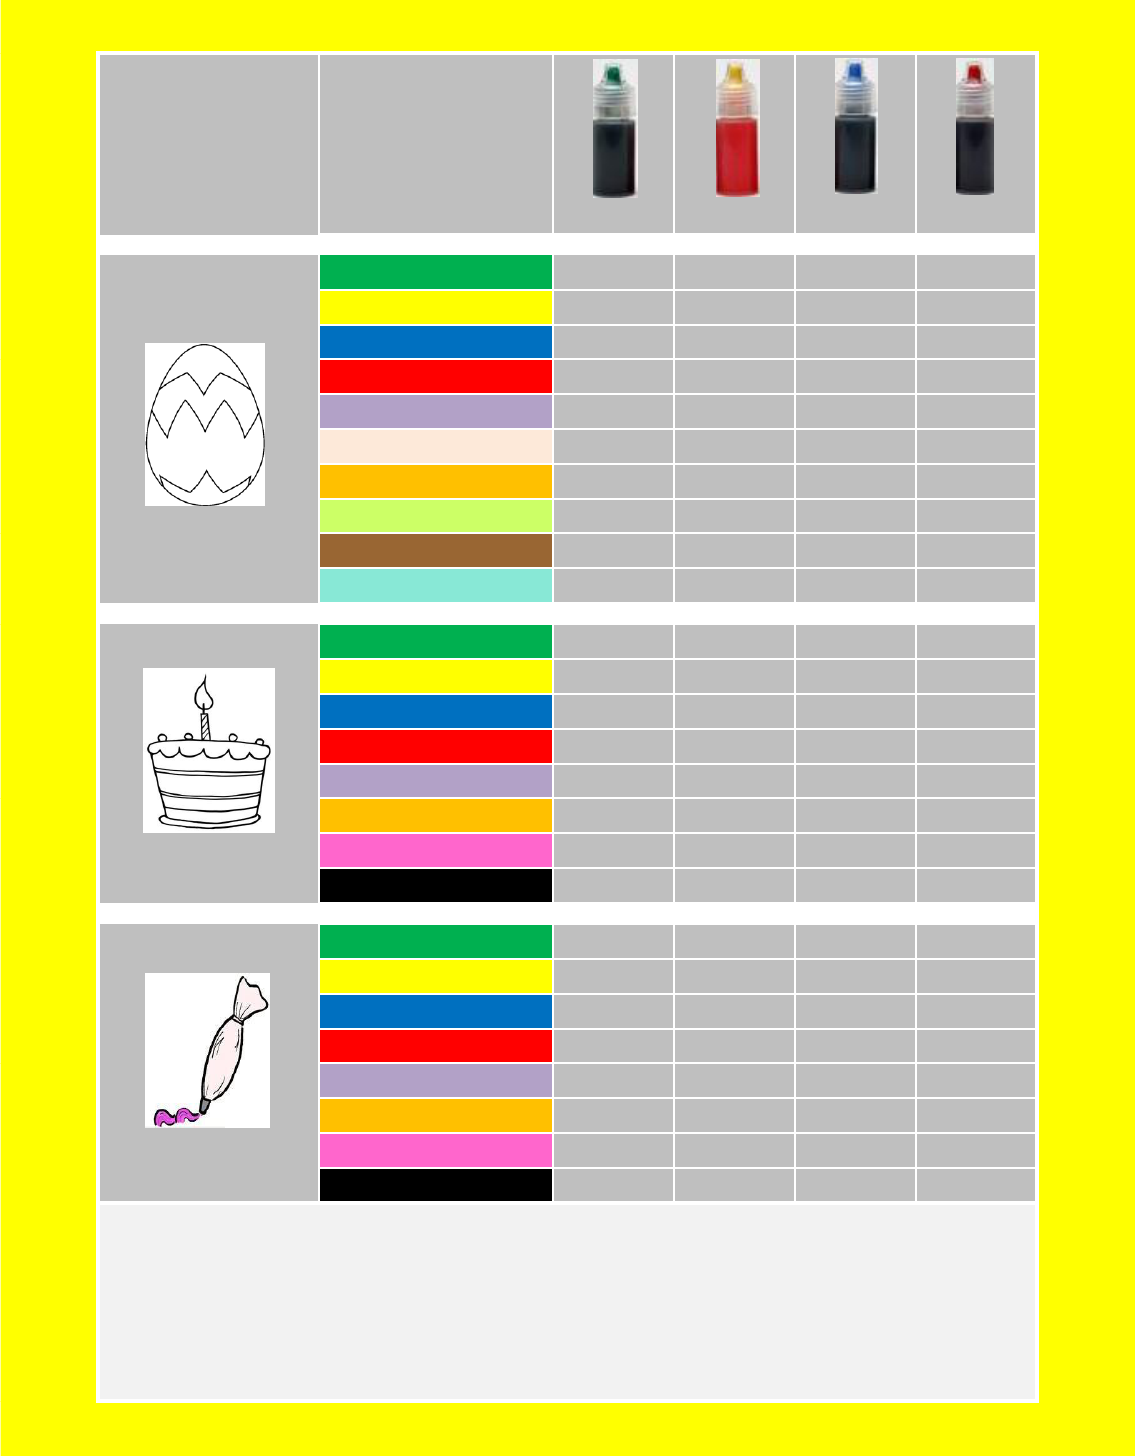 Food Coloring Chart - 9+ Free PDF Documents Download